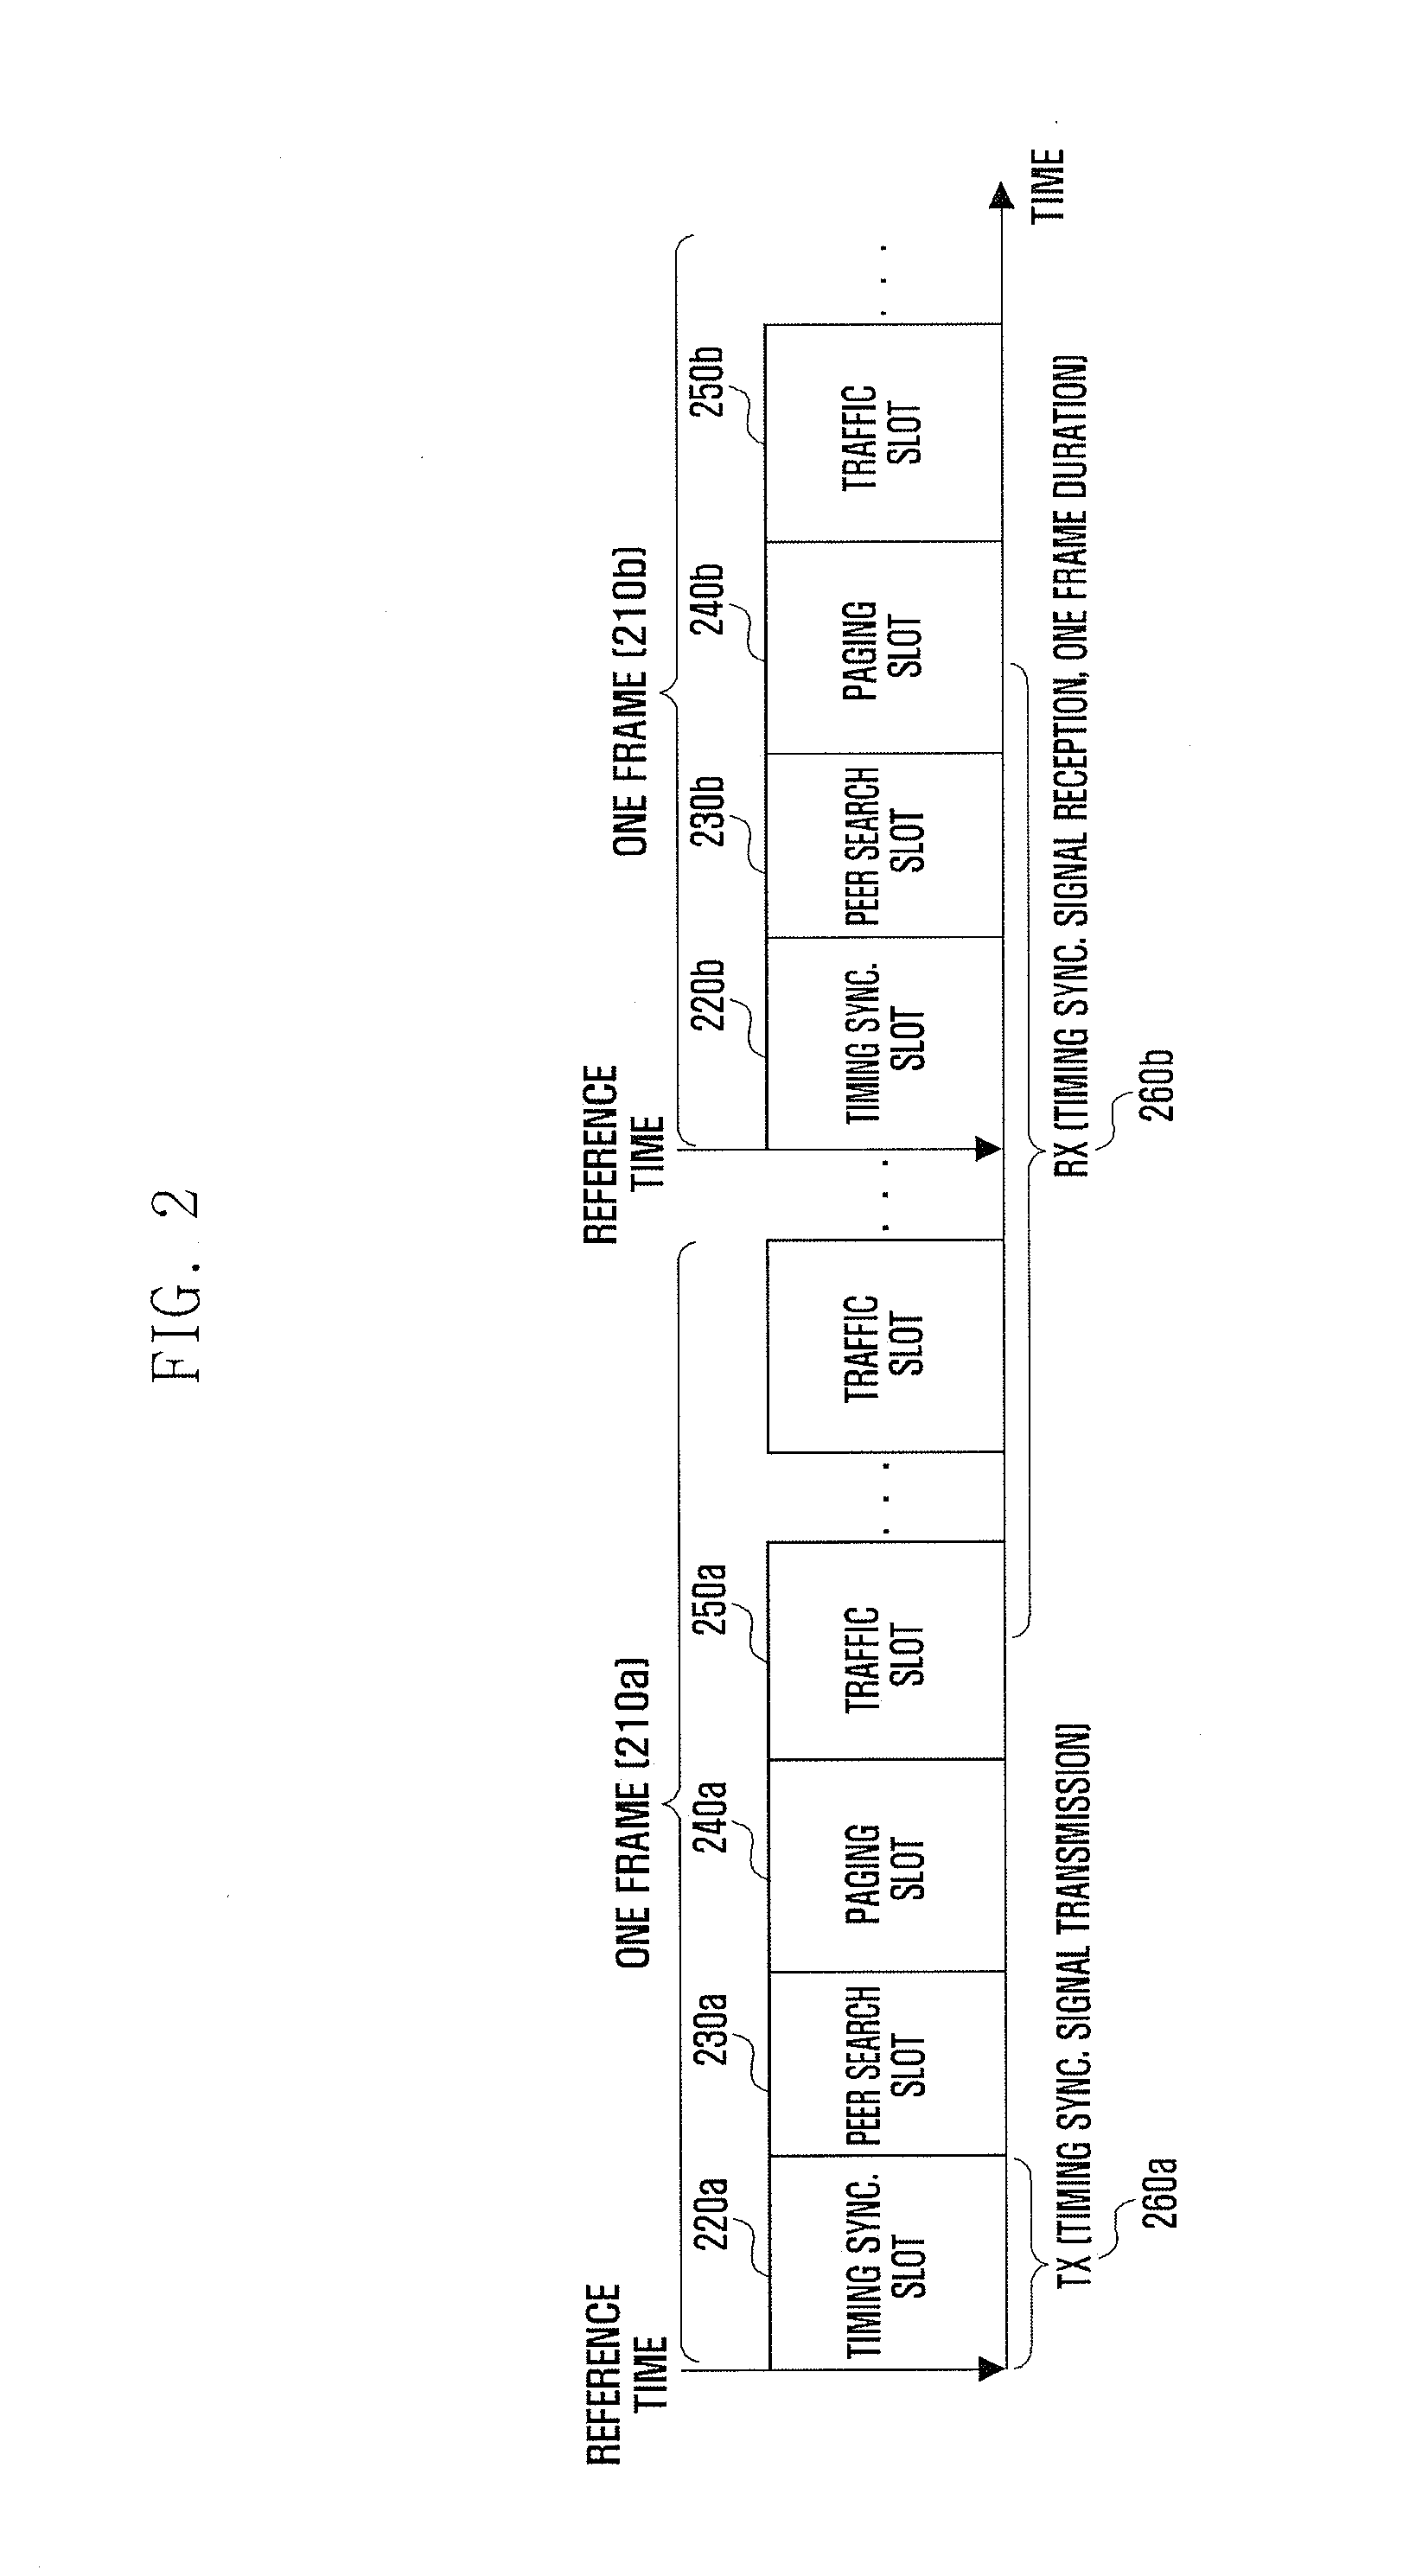 Terminal synchronization method and apparatus for use in wireless communication network